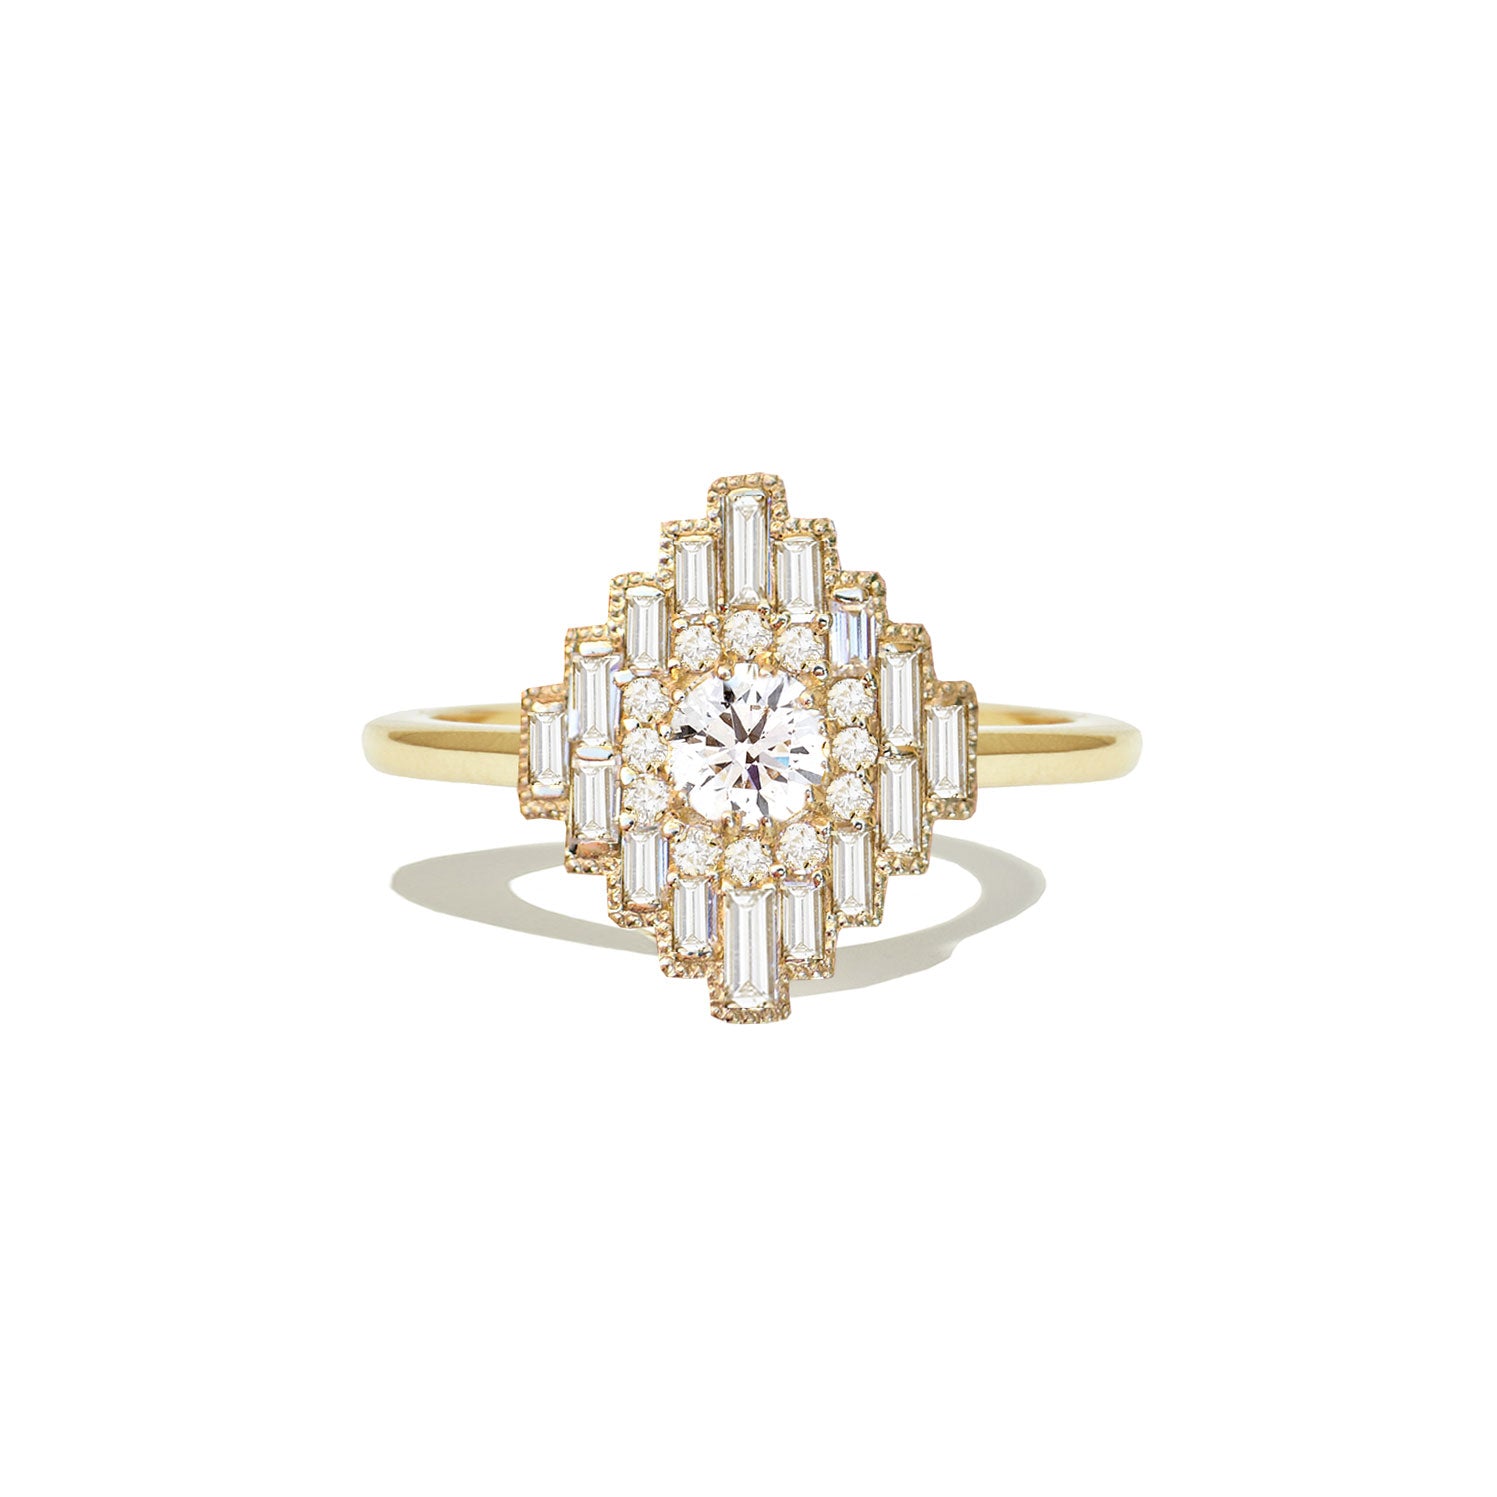 Baguette And Round Diamond Art Deco Engagement Ring | Berlinger Jewelry